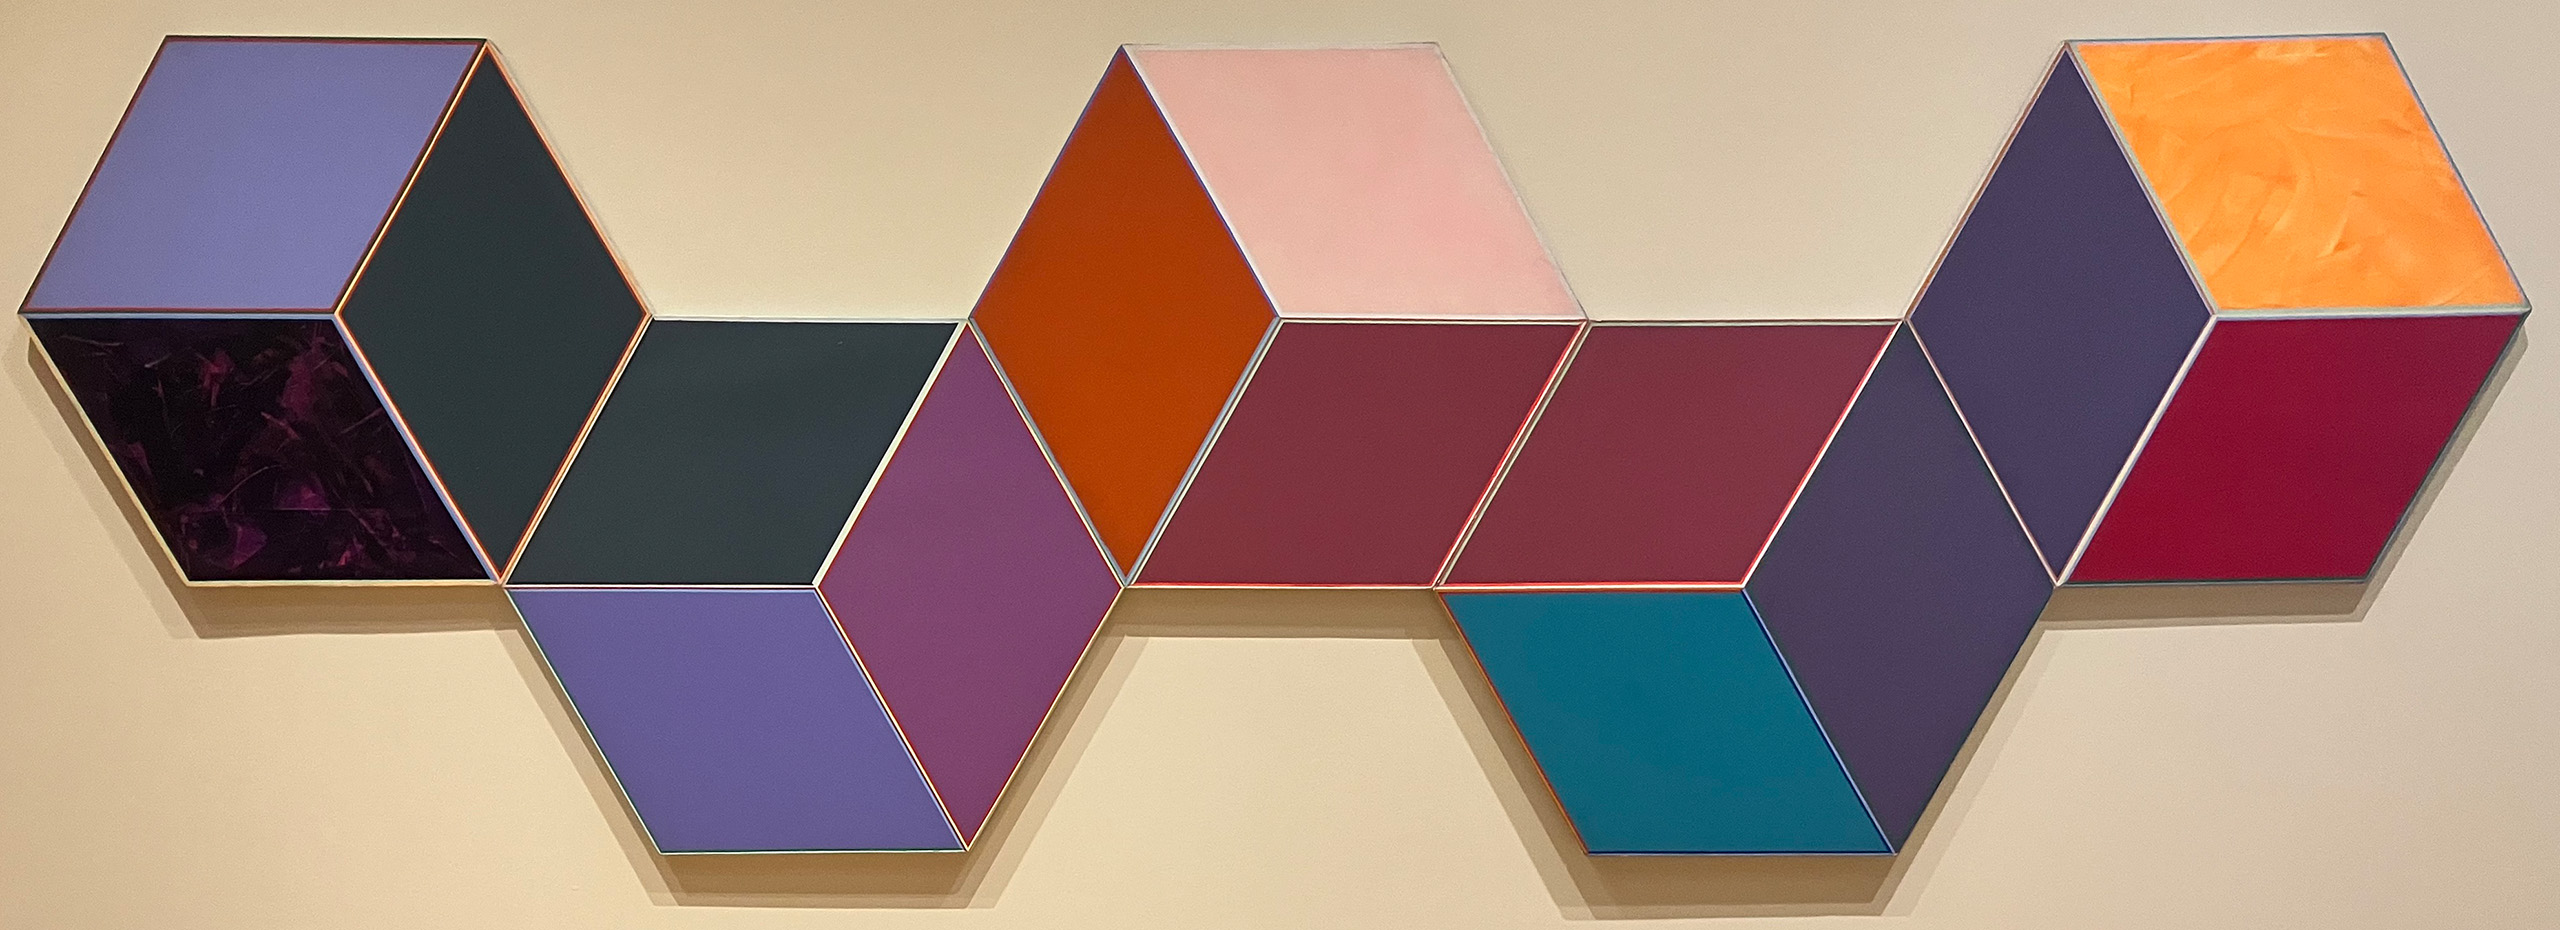 Five adjacent paintings in bright colors shaped like cubes